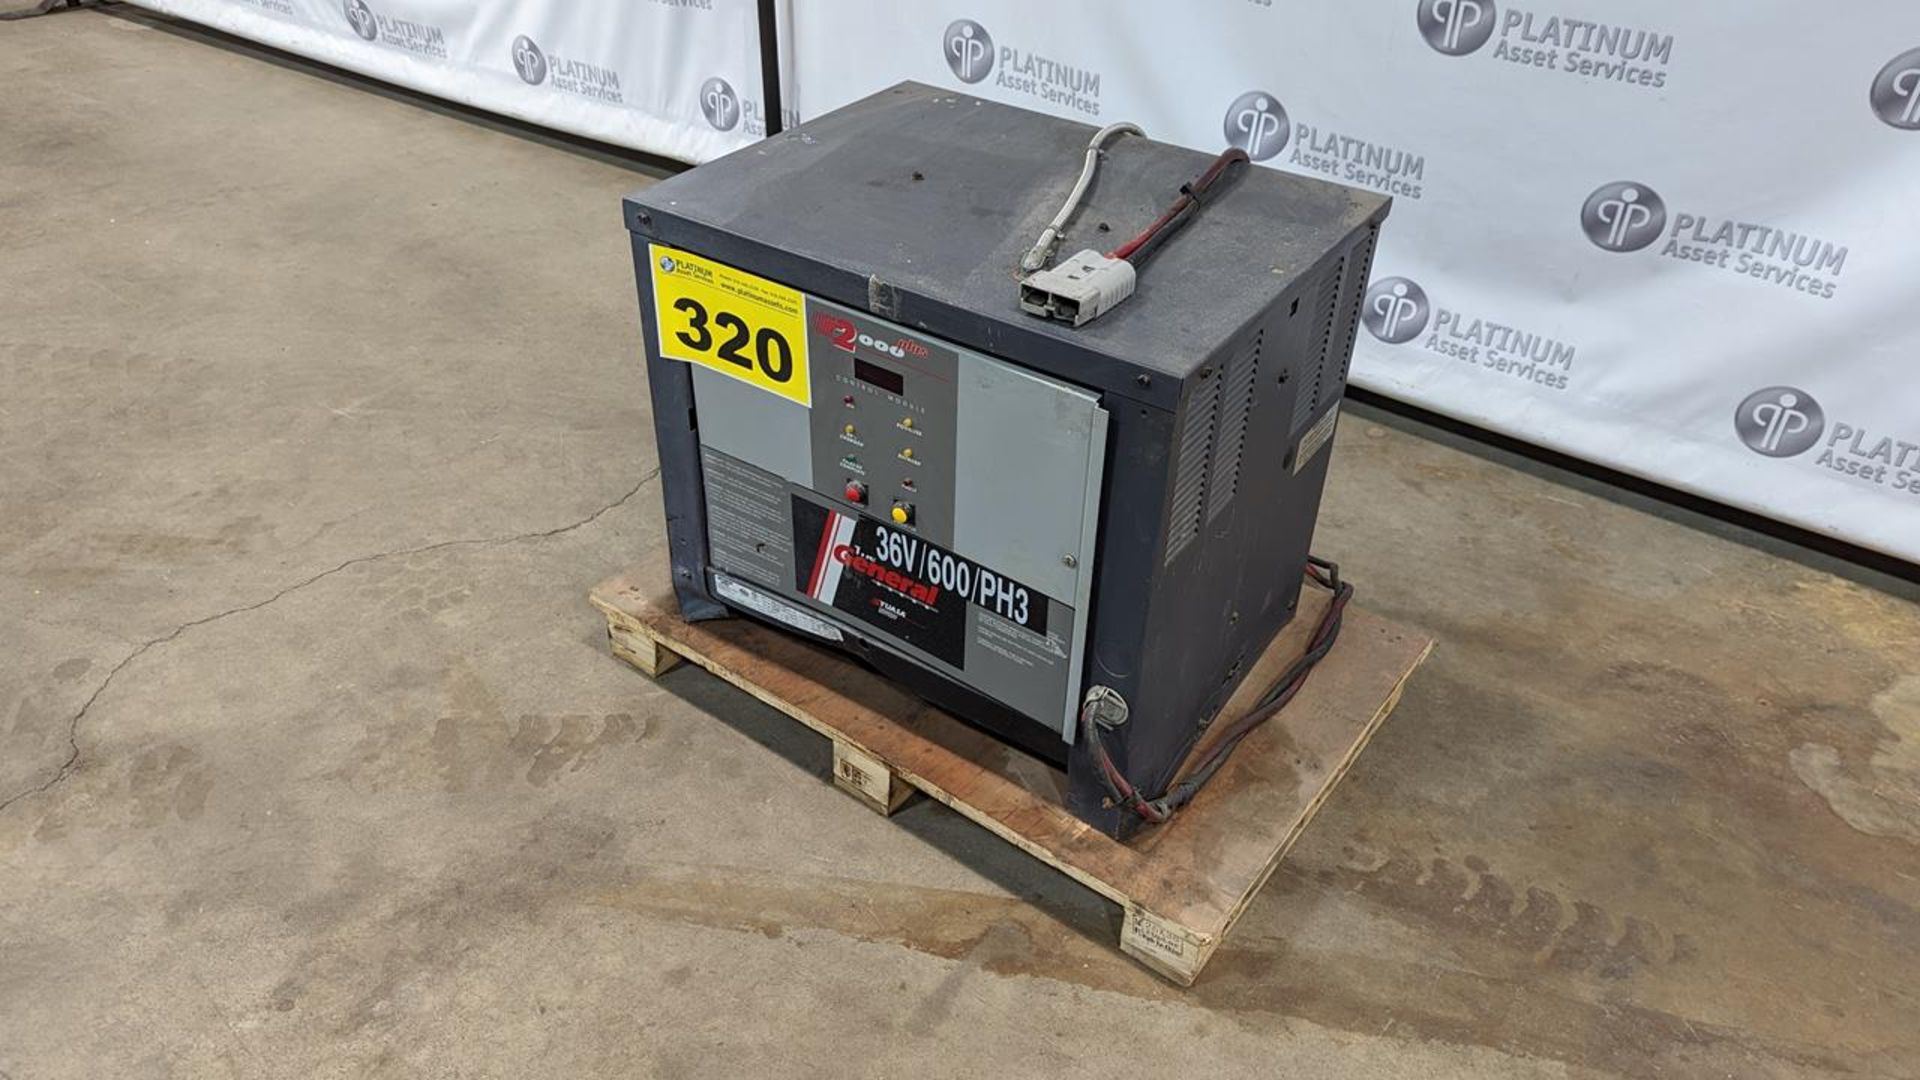 GENERAL BATTERY (YUASA), TG-18-775, 36 VOLT, 775 AMP HOURS, BATTERY CHARGER, 480/550/600 INFEED - Image 2 of 3